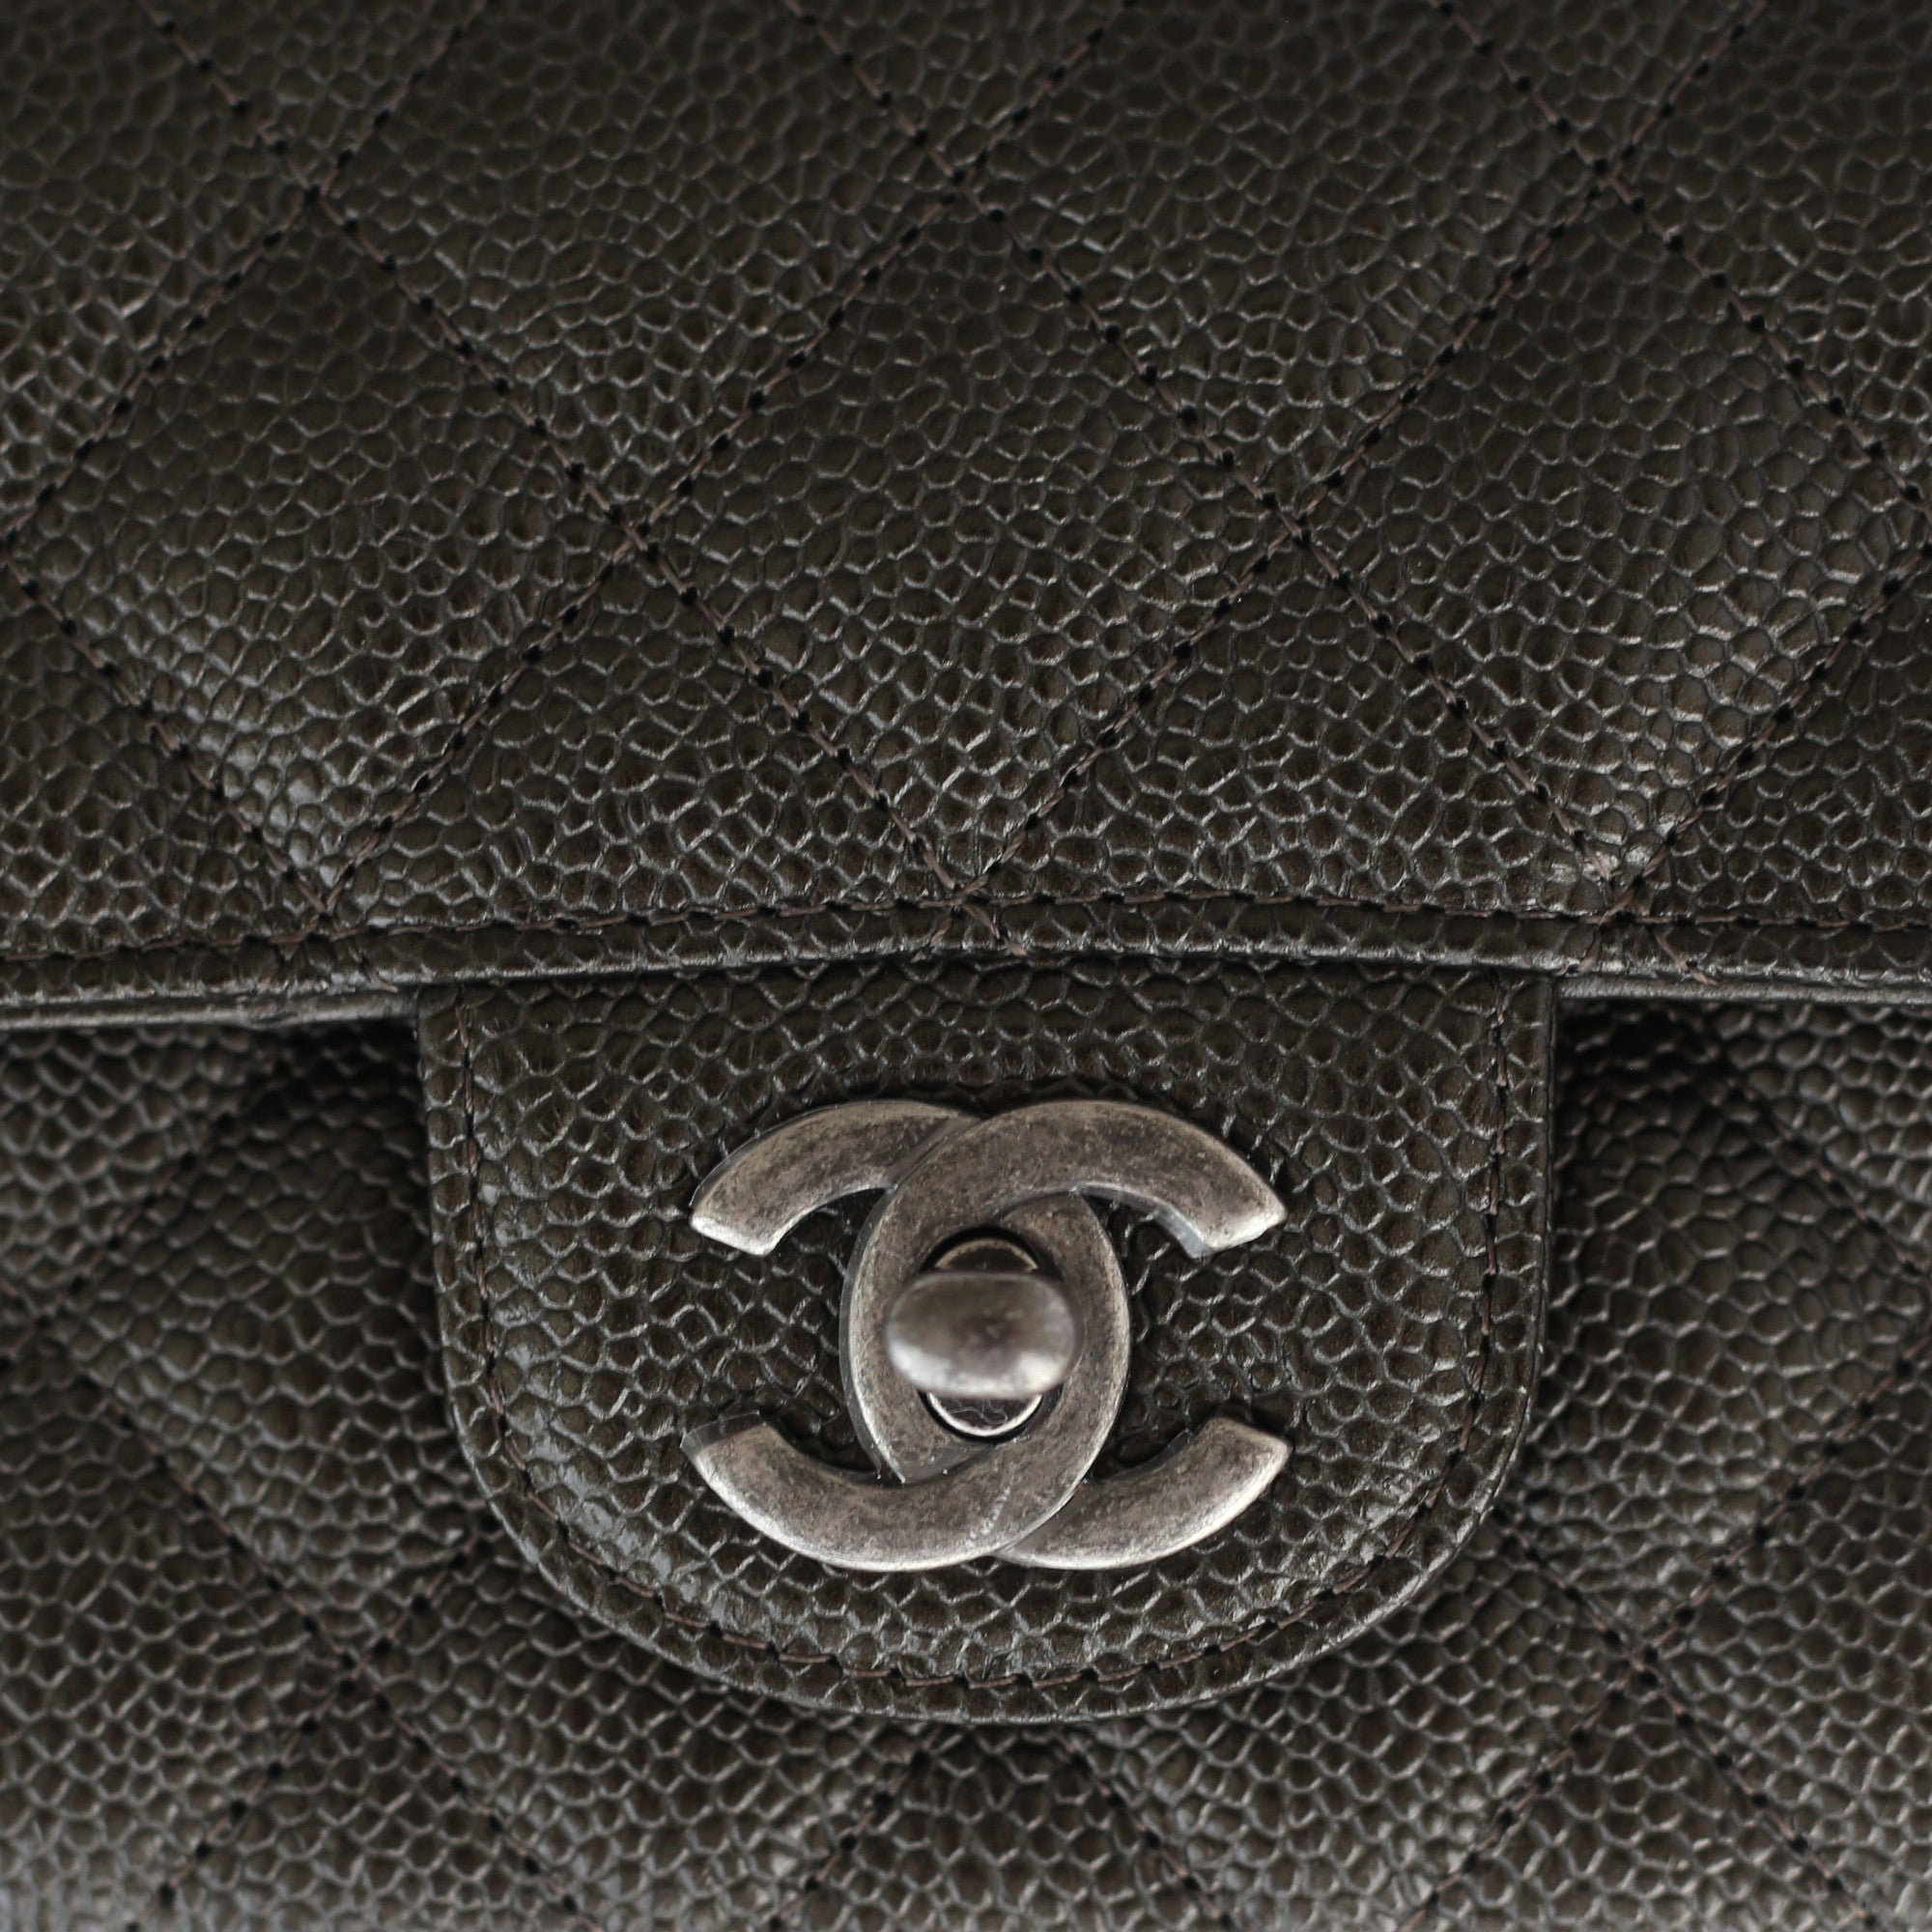 Chanel Caviar Quilted Mini Rectangular Flap Black Silver Hardware